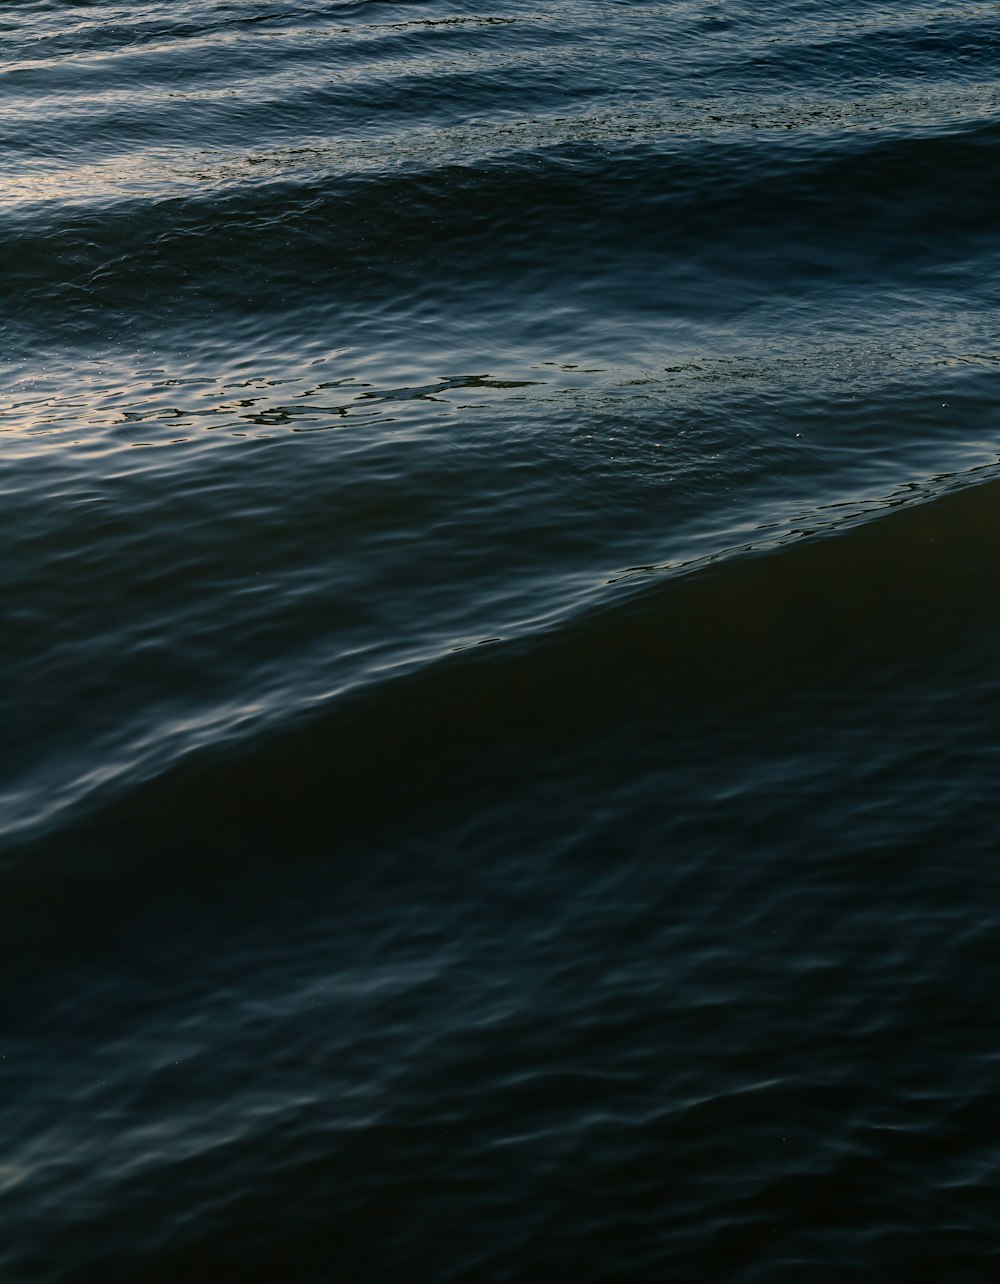 body of water with waves during daytime